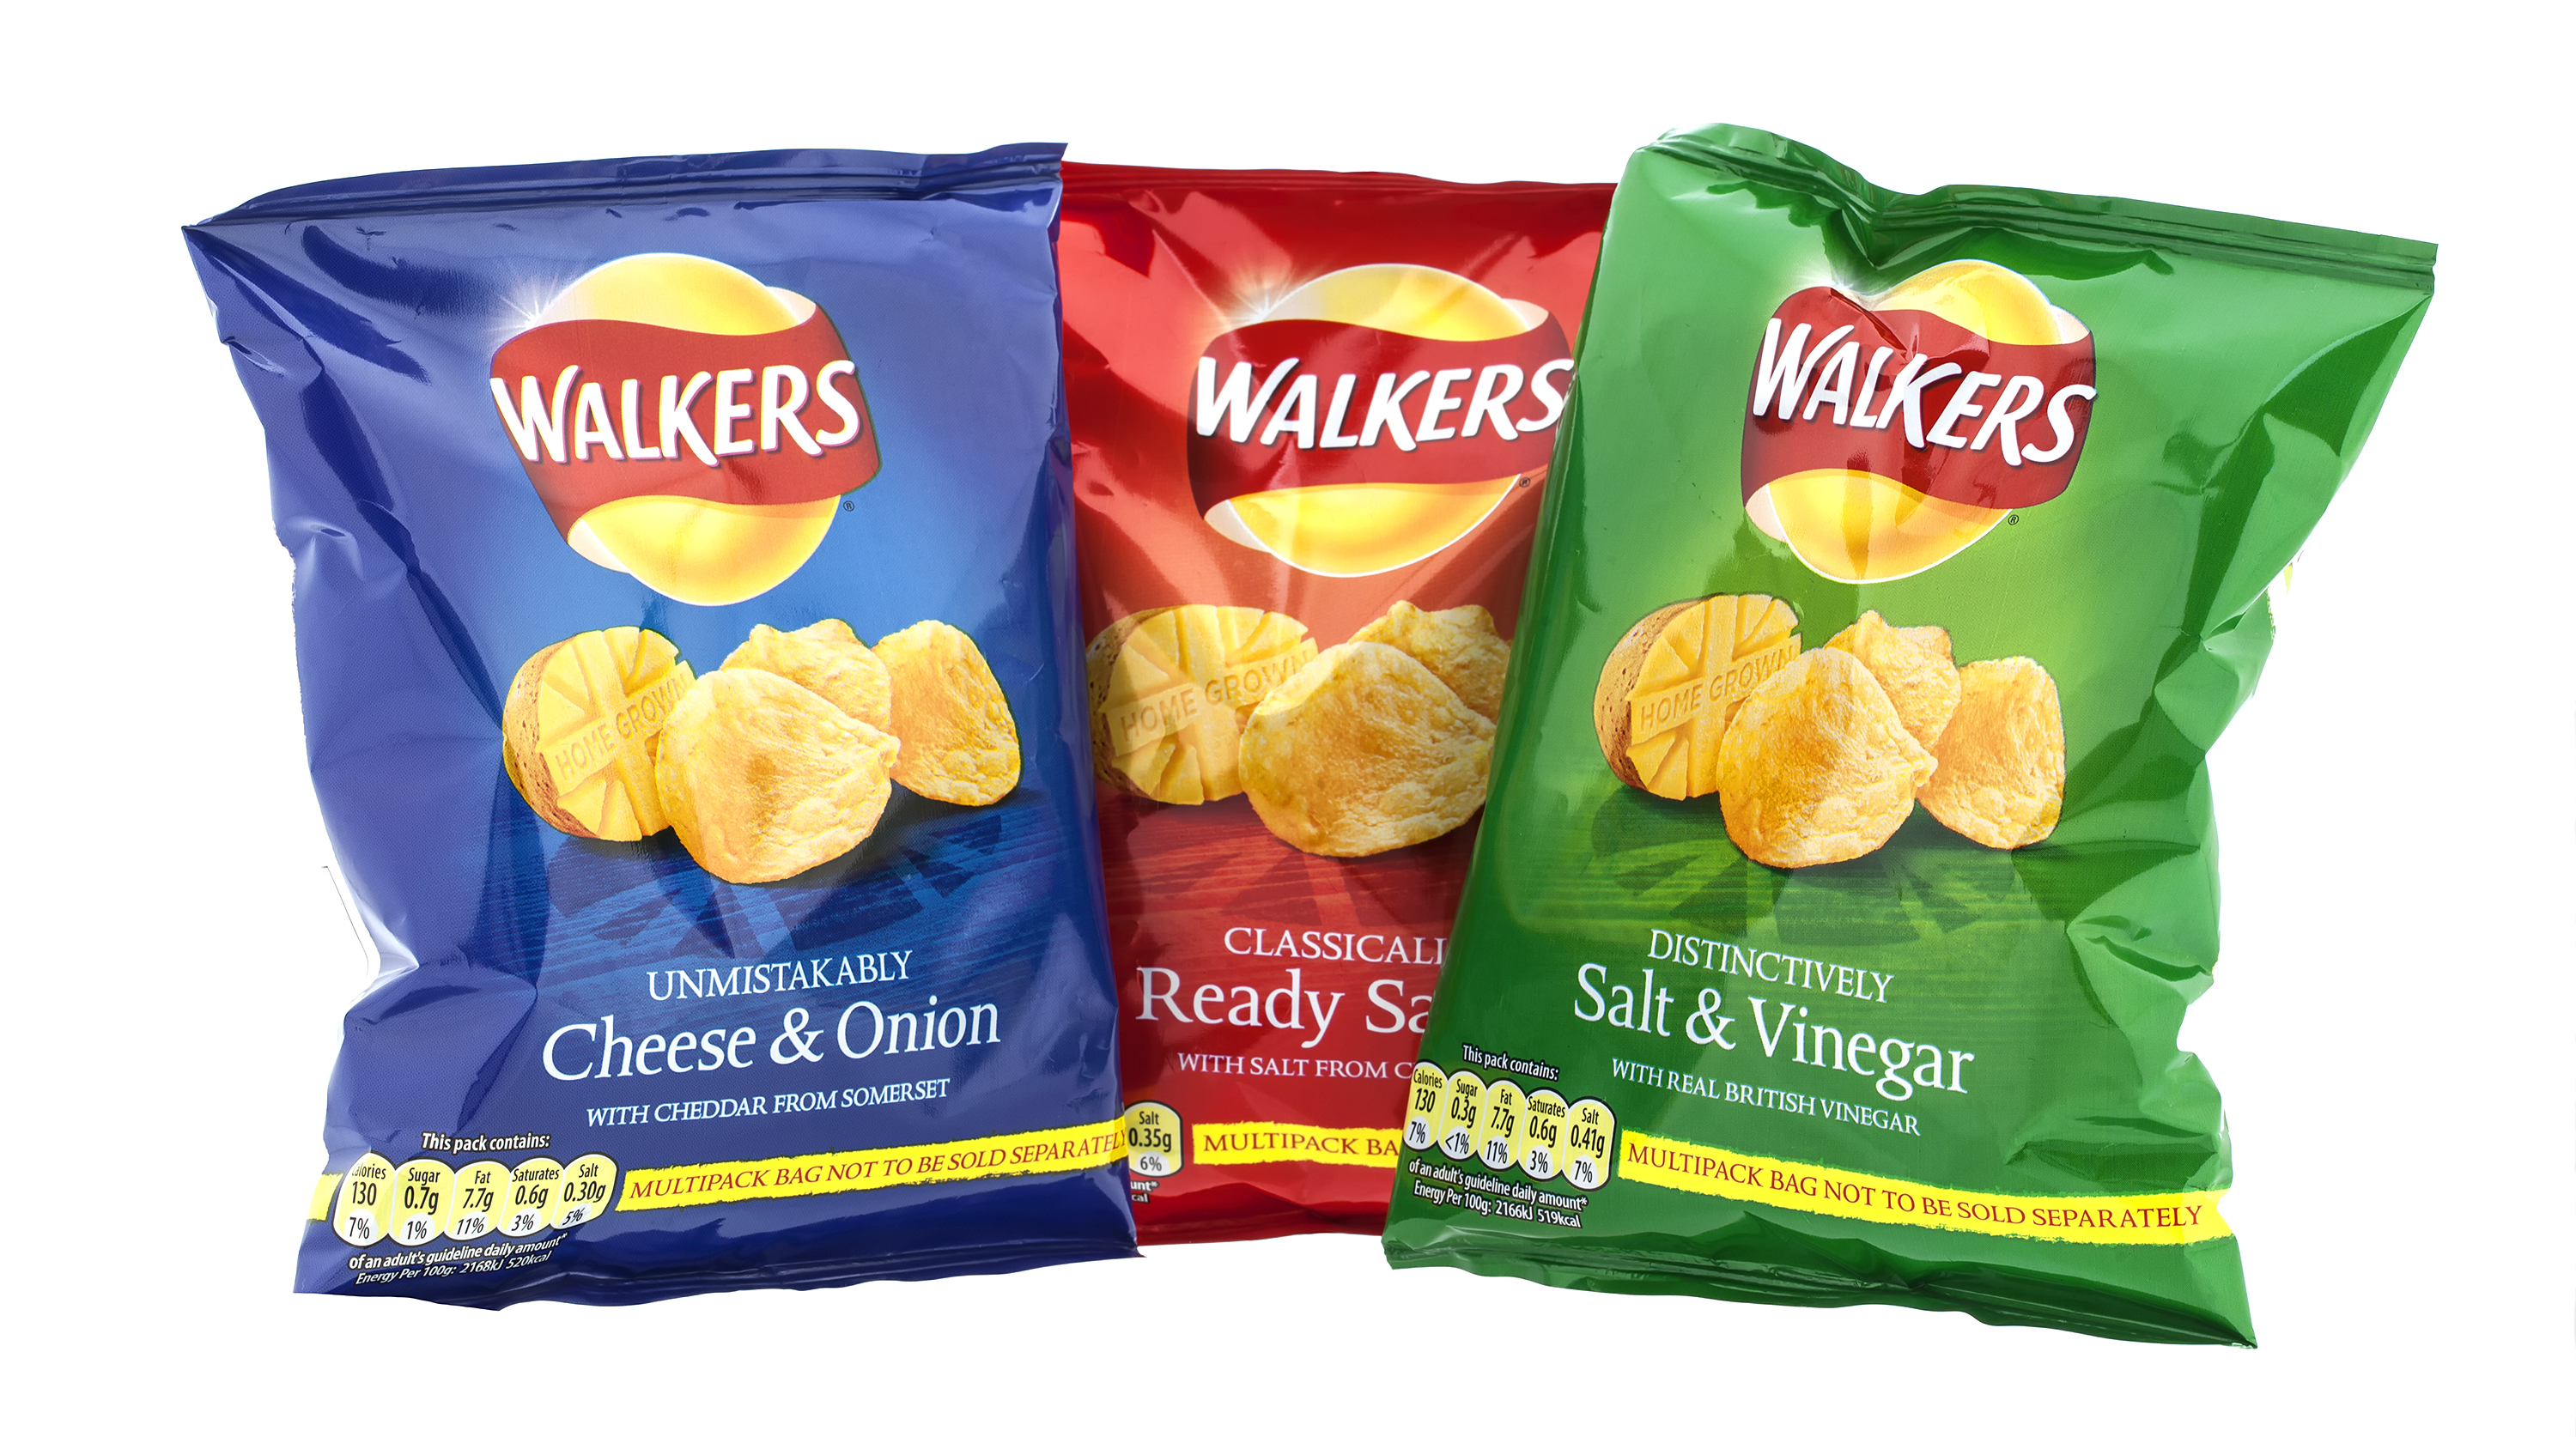 Could Meath become the first county to provide crisp packet recycling?